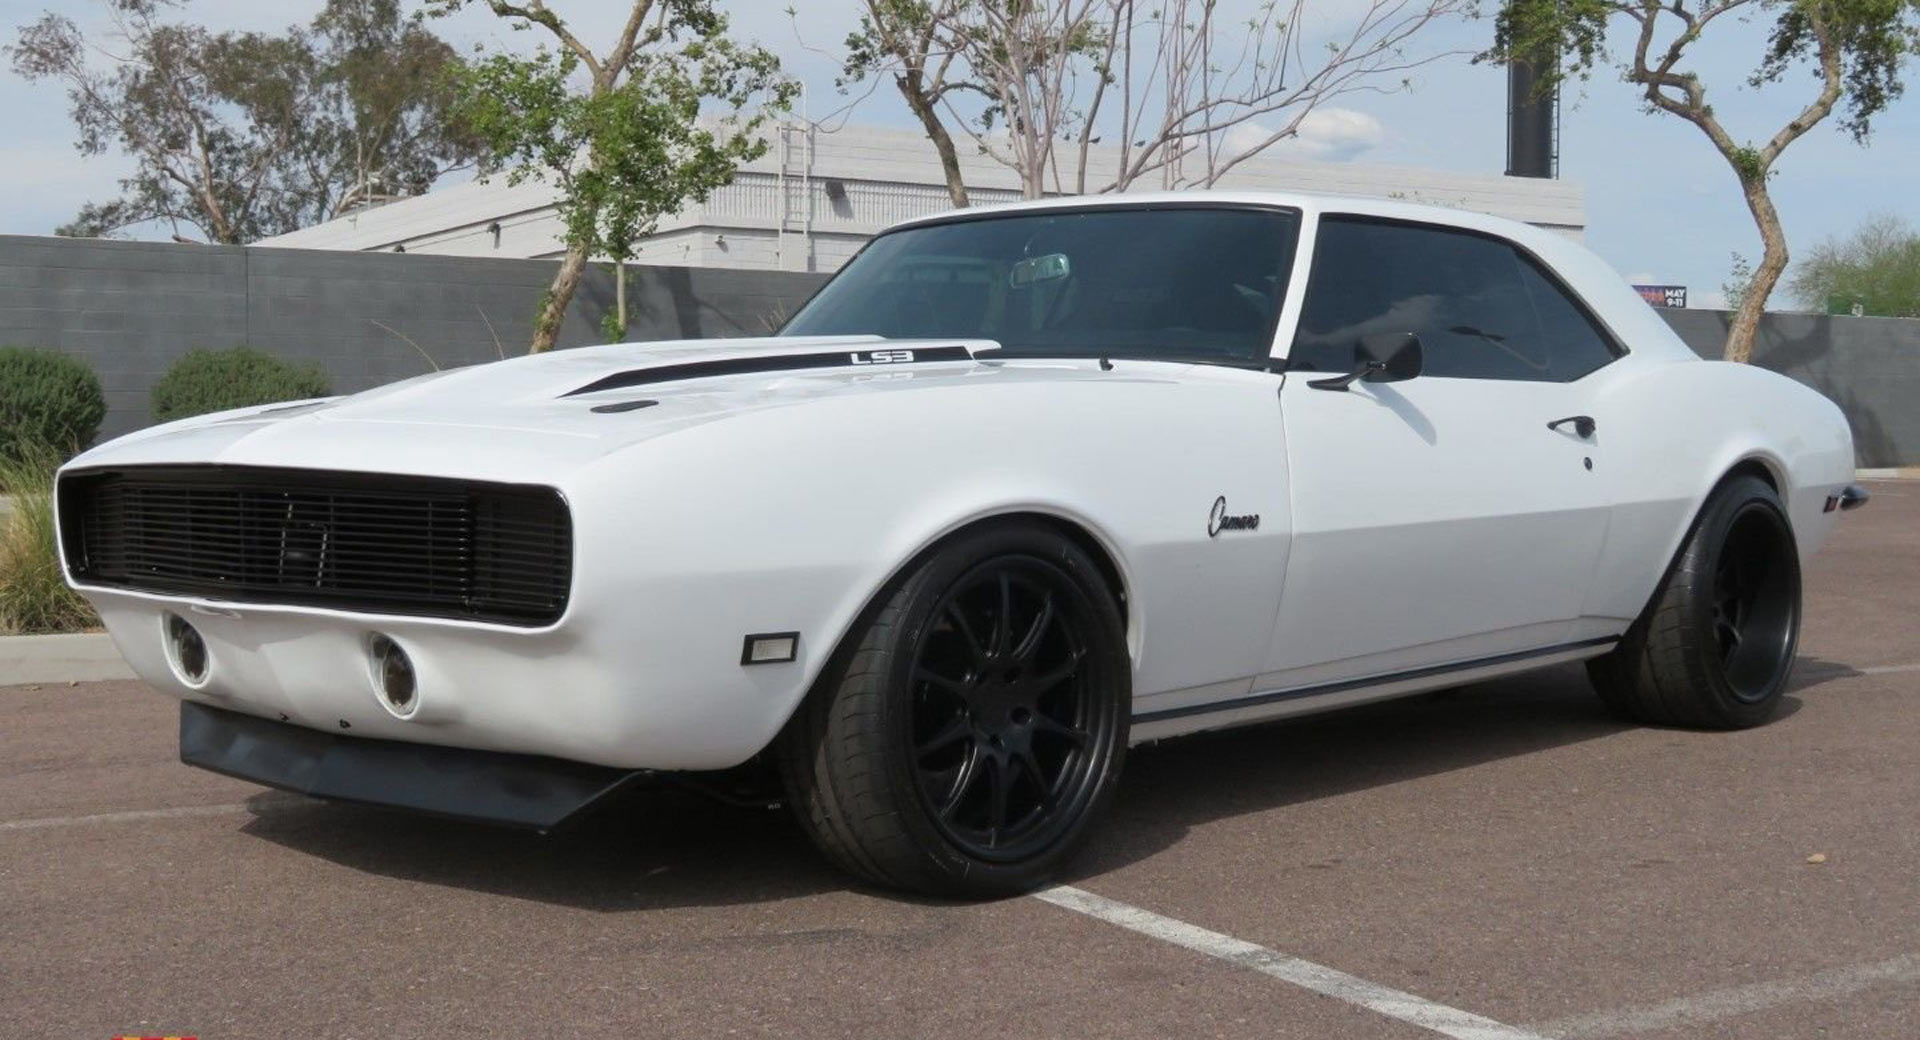 Someone Dropped Over 100k To Mod This 68 Camaro Could Be Yours For 75k Carscoops